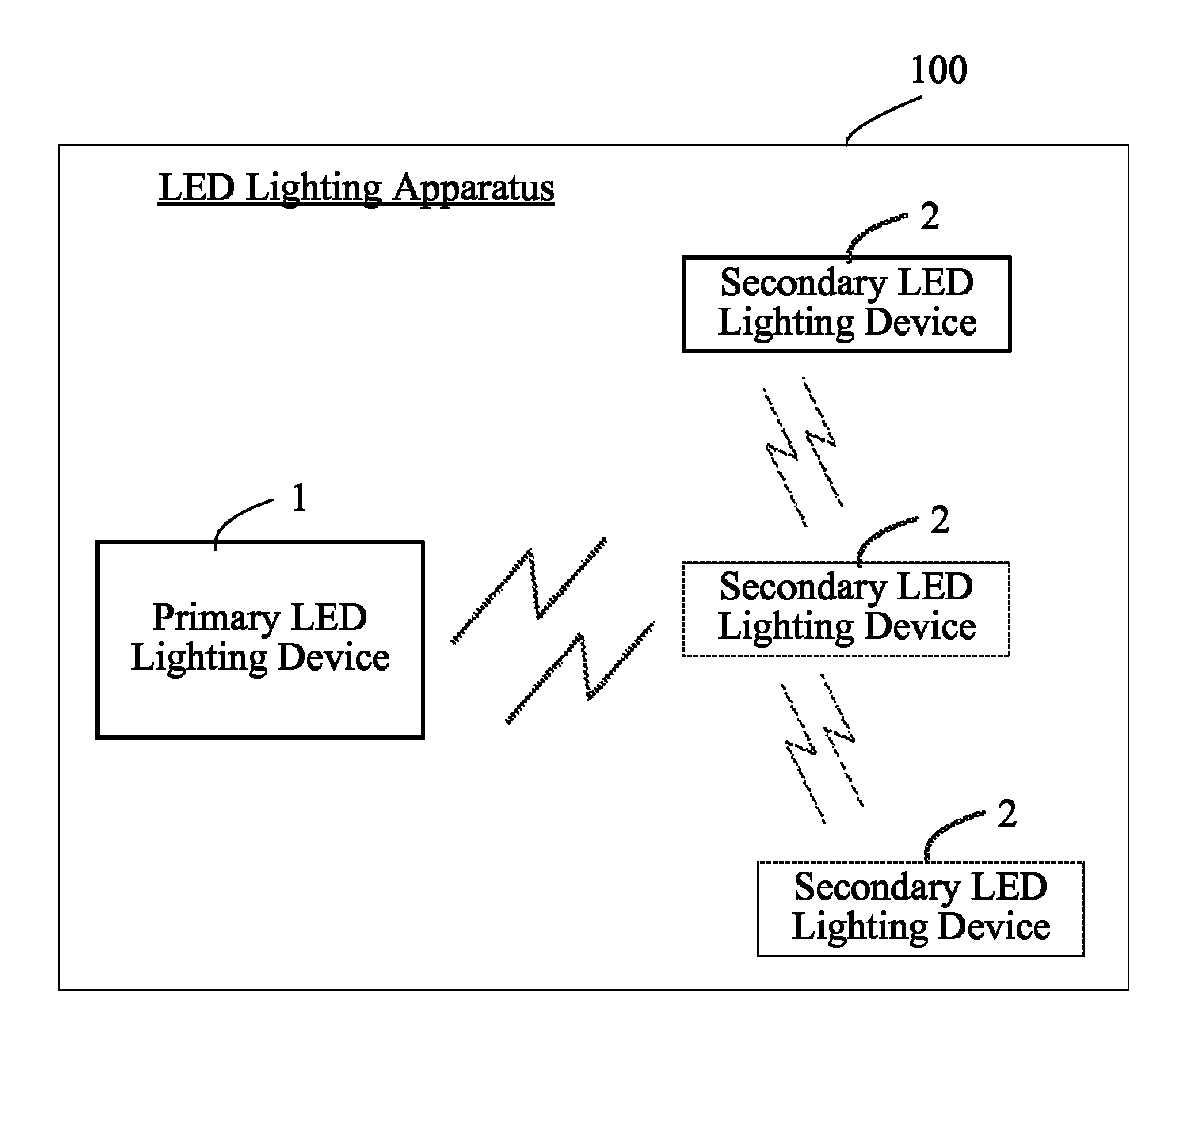 LED lighting apparatus, control system, and configuration method